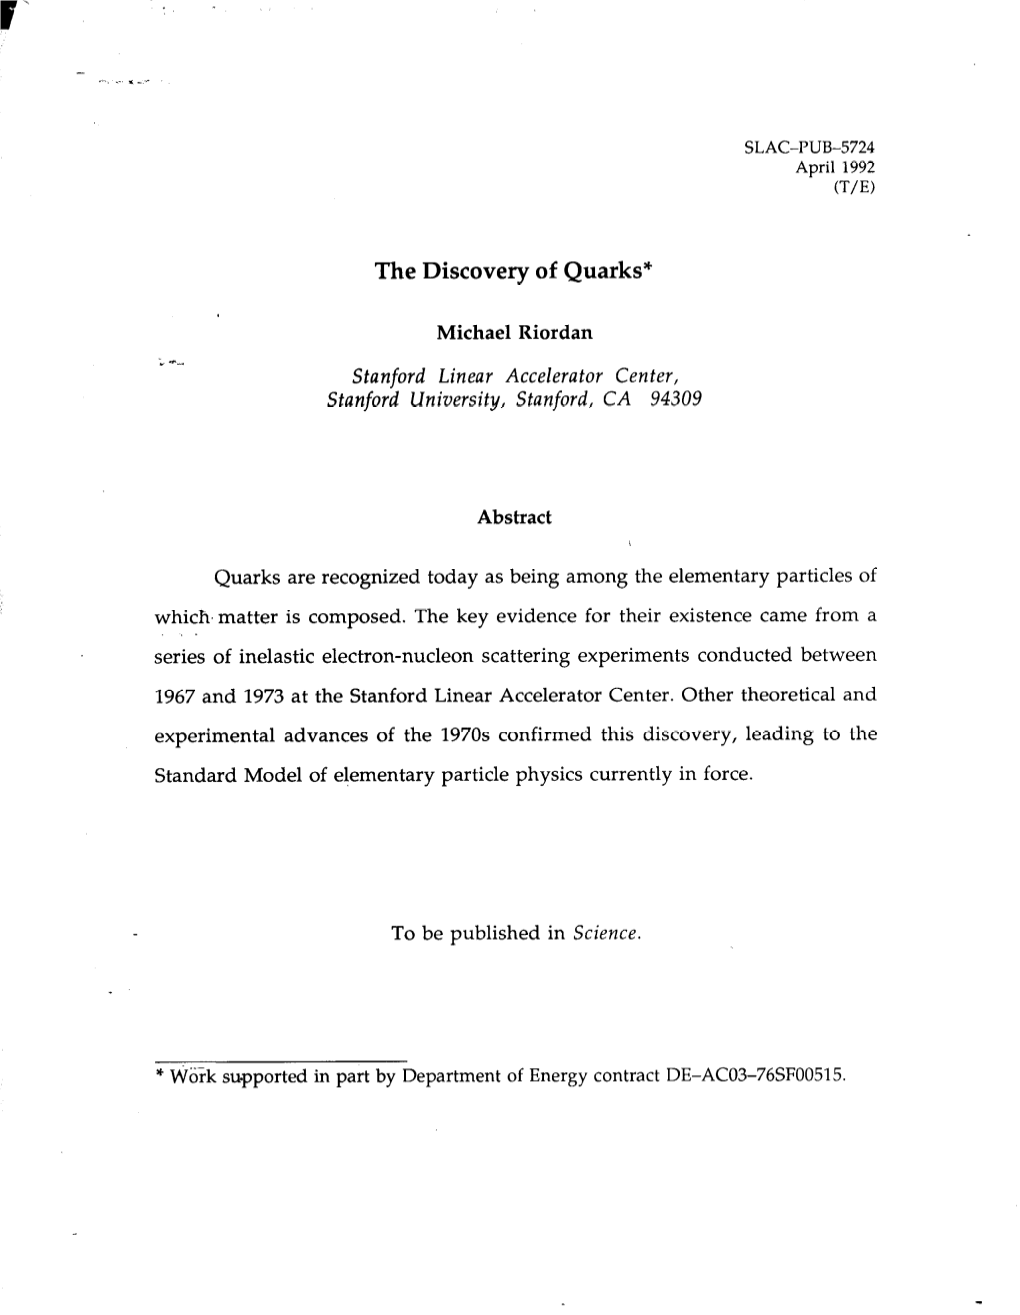 The Discovery of Quarks*